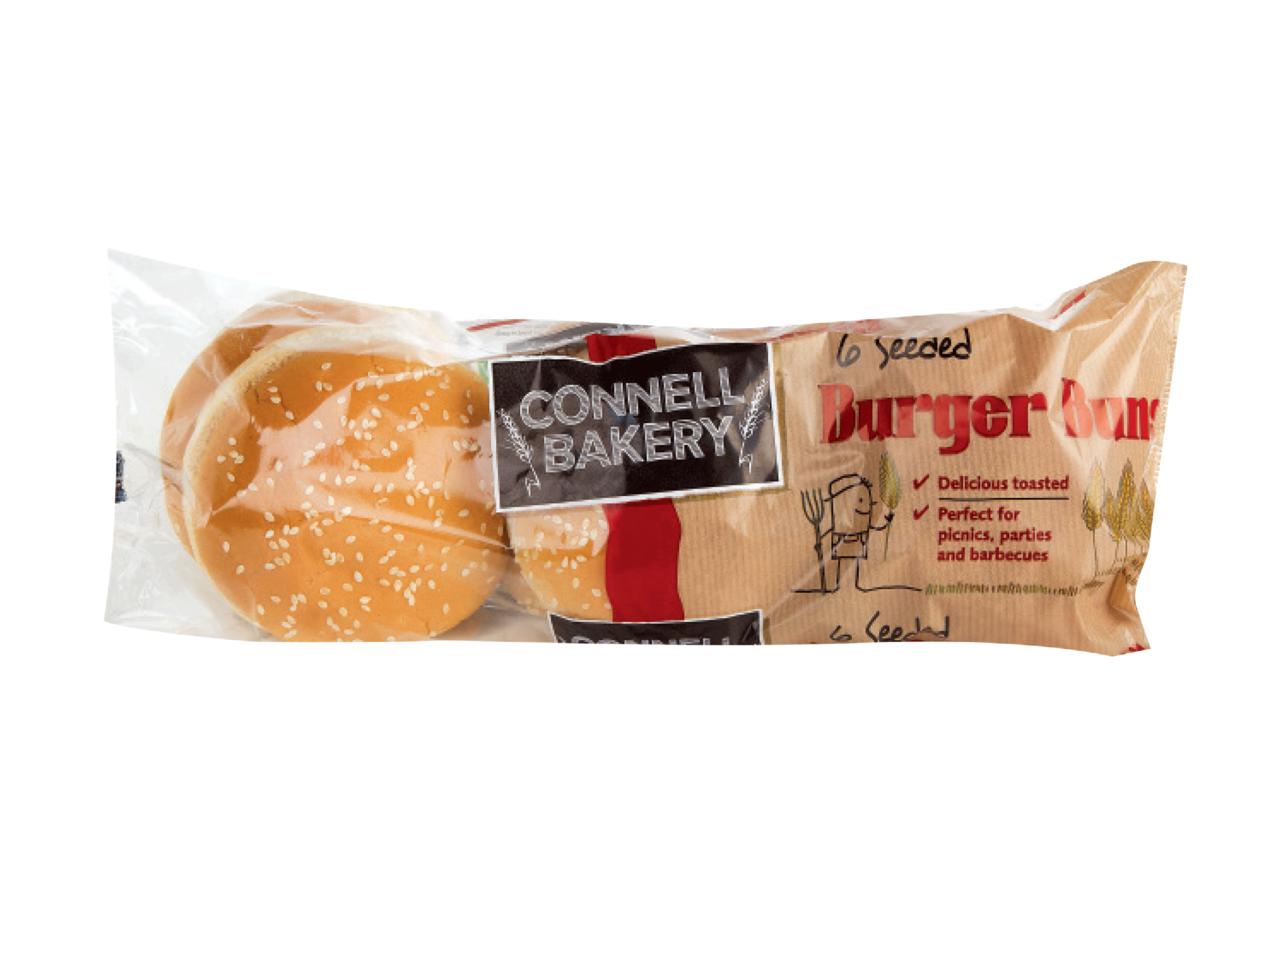 CONNELL BAKERY(R) 6 Seeded Burger Buns